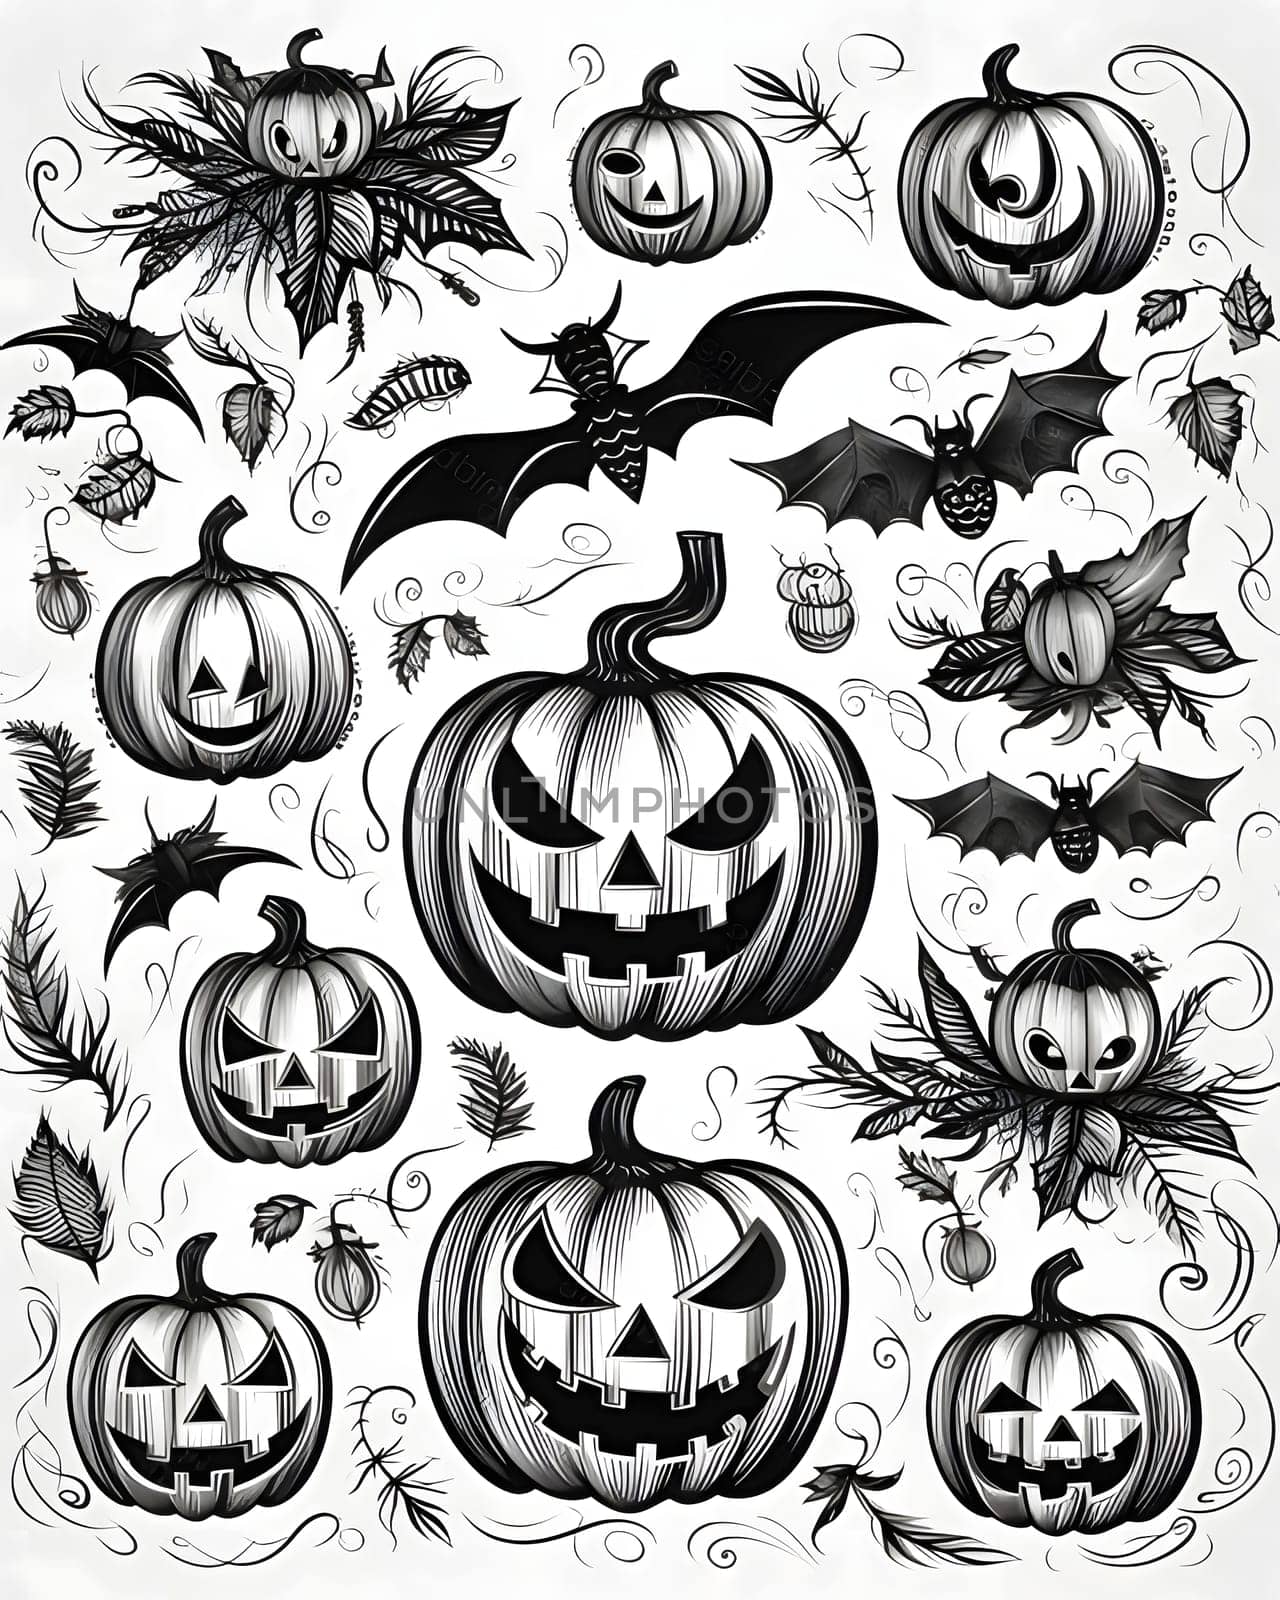 Black and white jack-o-lantern pumpkins and bats as abstract background, wallpaper, banner, texture design with pattern - vector. by ThemesS